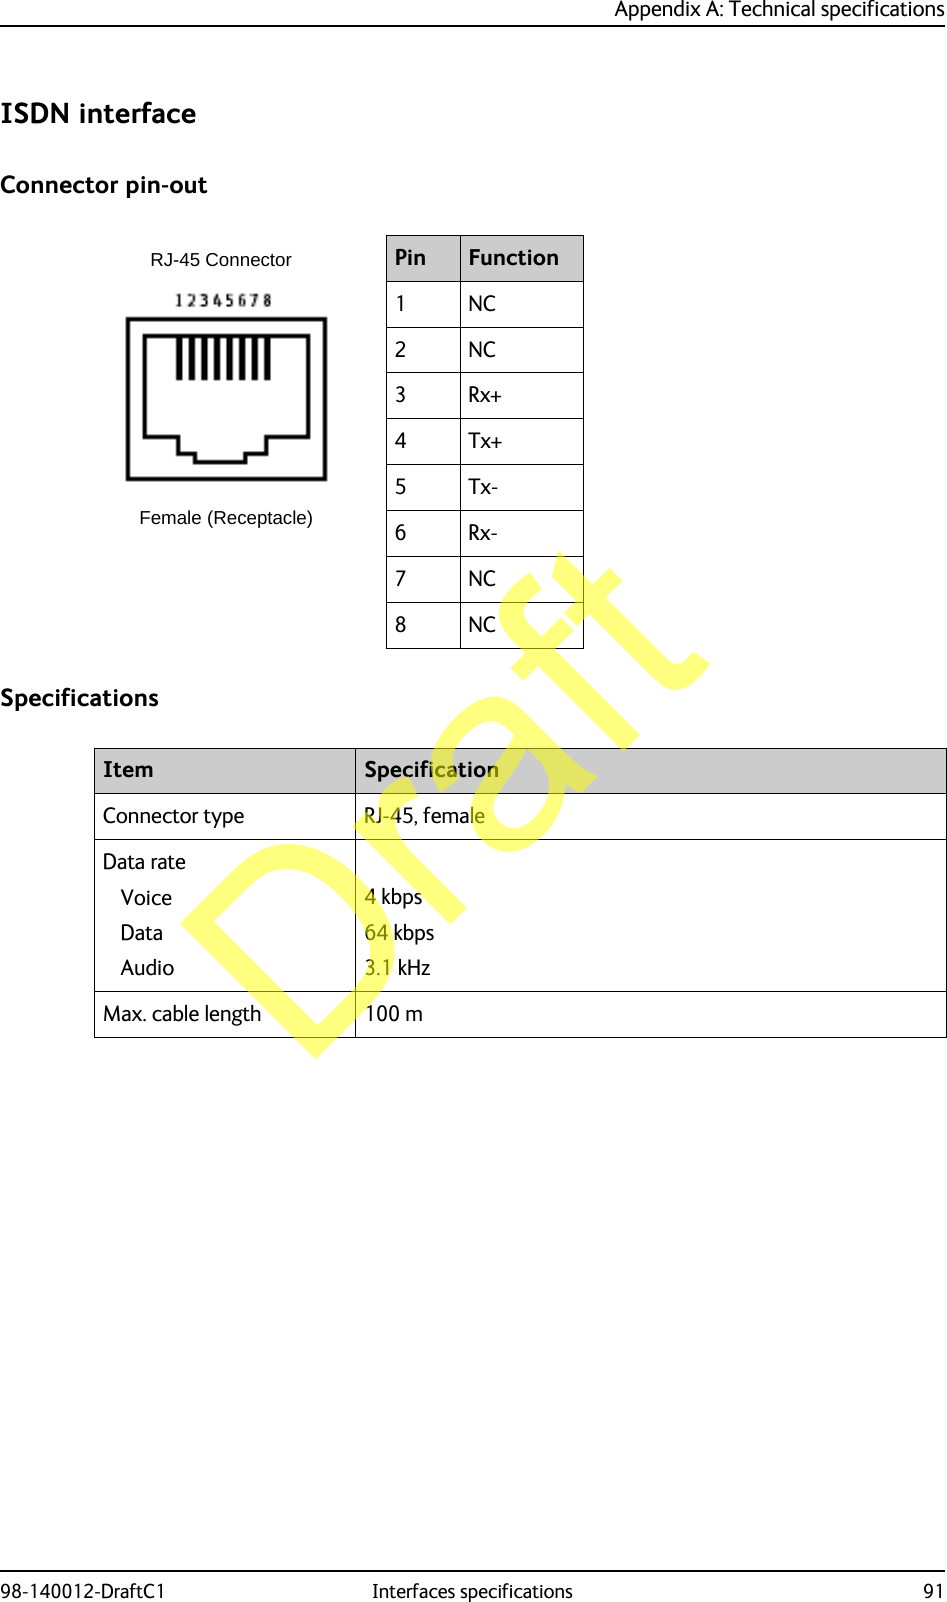 Appendix A: Technical specifications98-140012-DraftC1 Interfaces specifications 91ISDN interfaceConnector pin-outSpecificationsPin Function1NC2NC3Rx+4Tx+5Tx-6Rx-7NC8NCRJ-45 ConnectorFemale (Receptacle)Item SpecificationConnector type RJ-45, femaleData rateVoiceDataAudio4kbps64 kbps3.1 kHzMax. cable length 100 mDraft